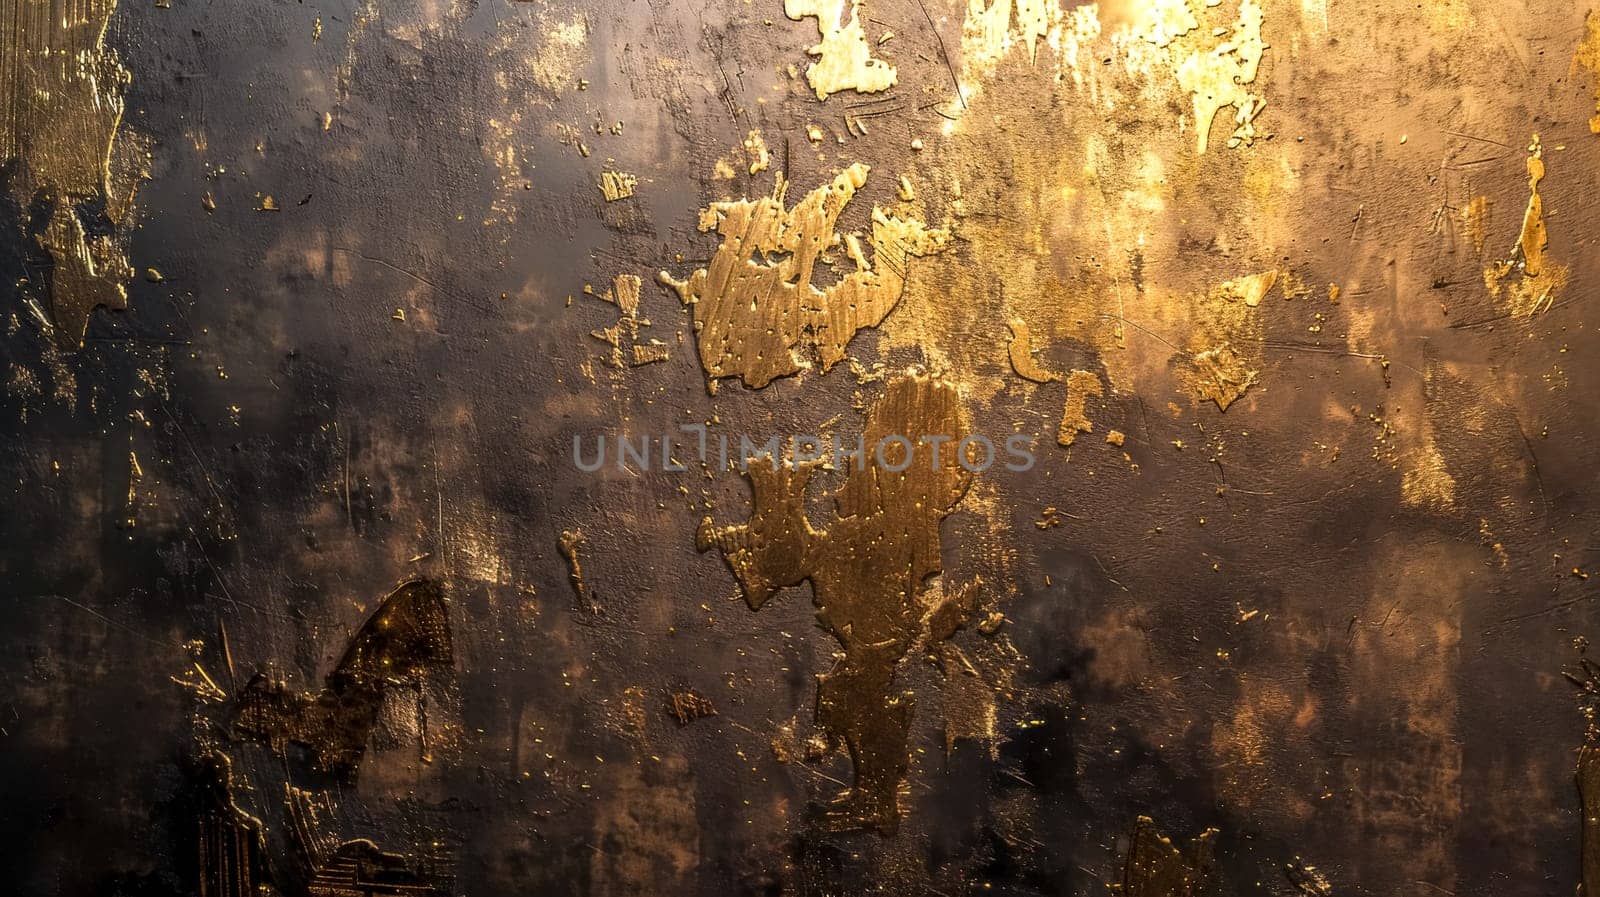 Close-up of a wall with golden hues and peeling paint, showcasing texture and decay